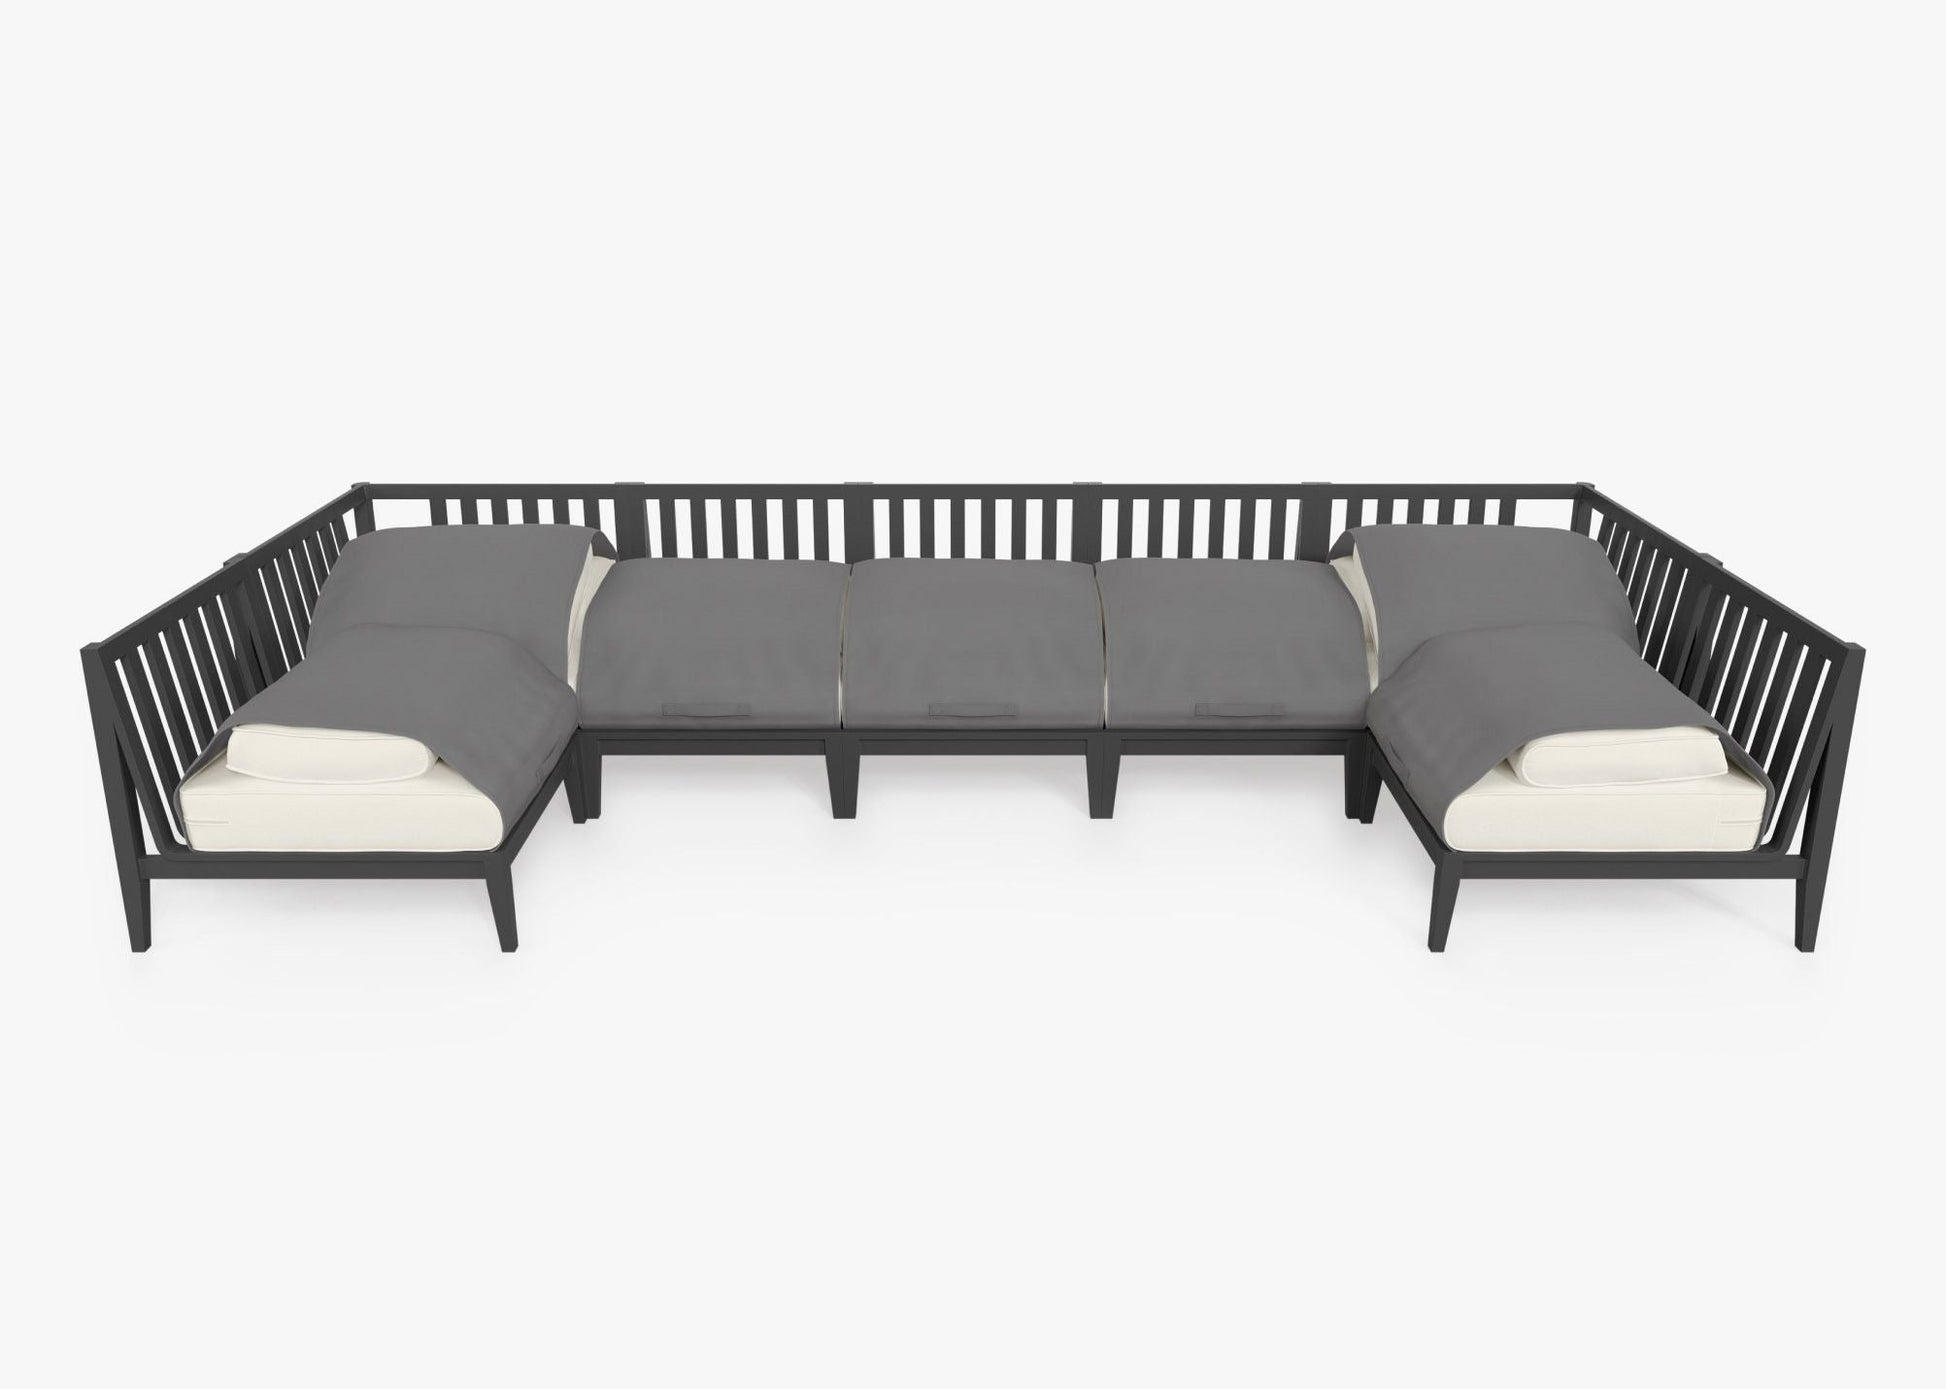 Live Outer 156" x 64" Charcoal Aluminum Outdoor U Sectional 7-Seat With Palisades Cream Cushion